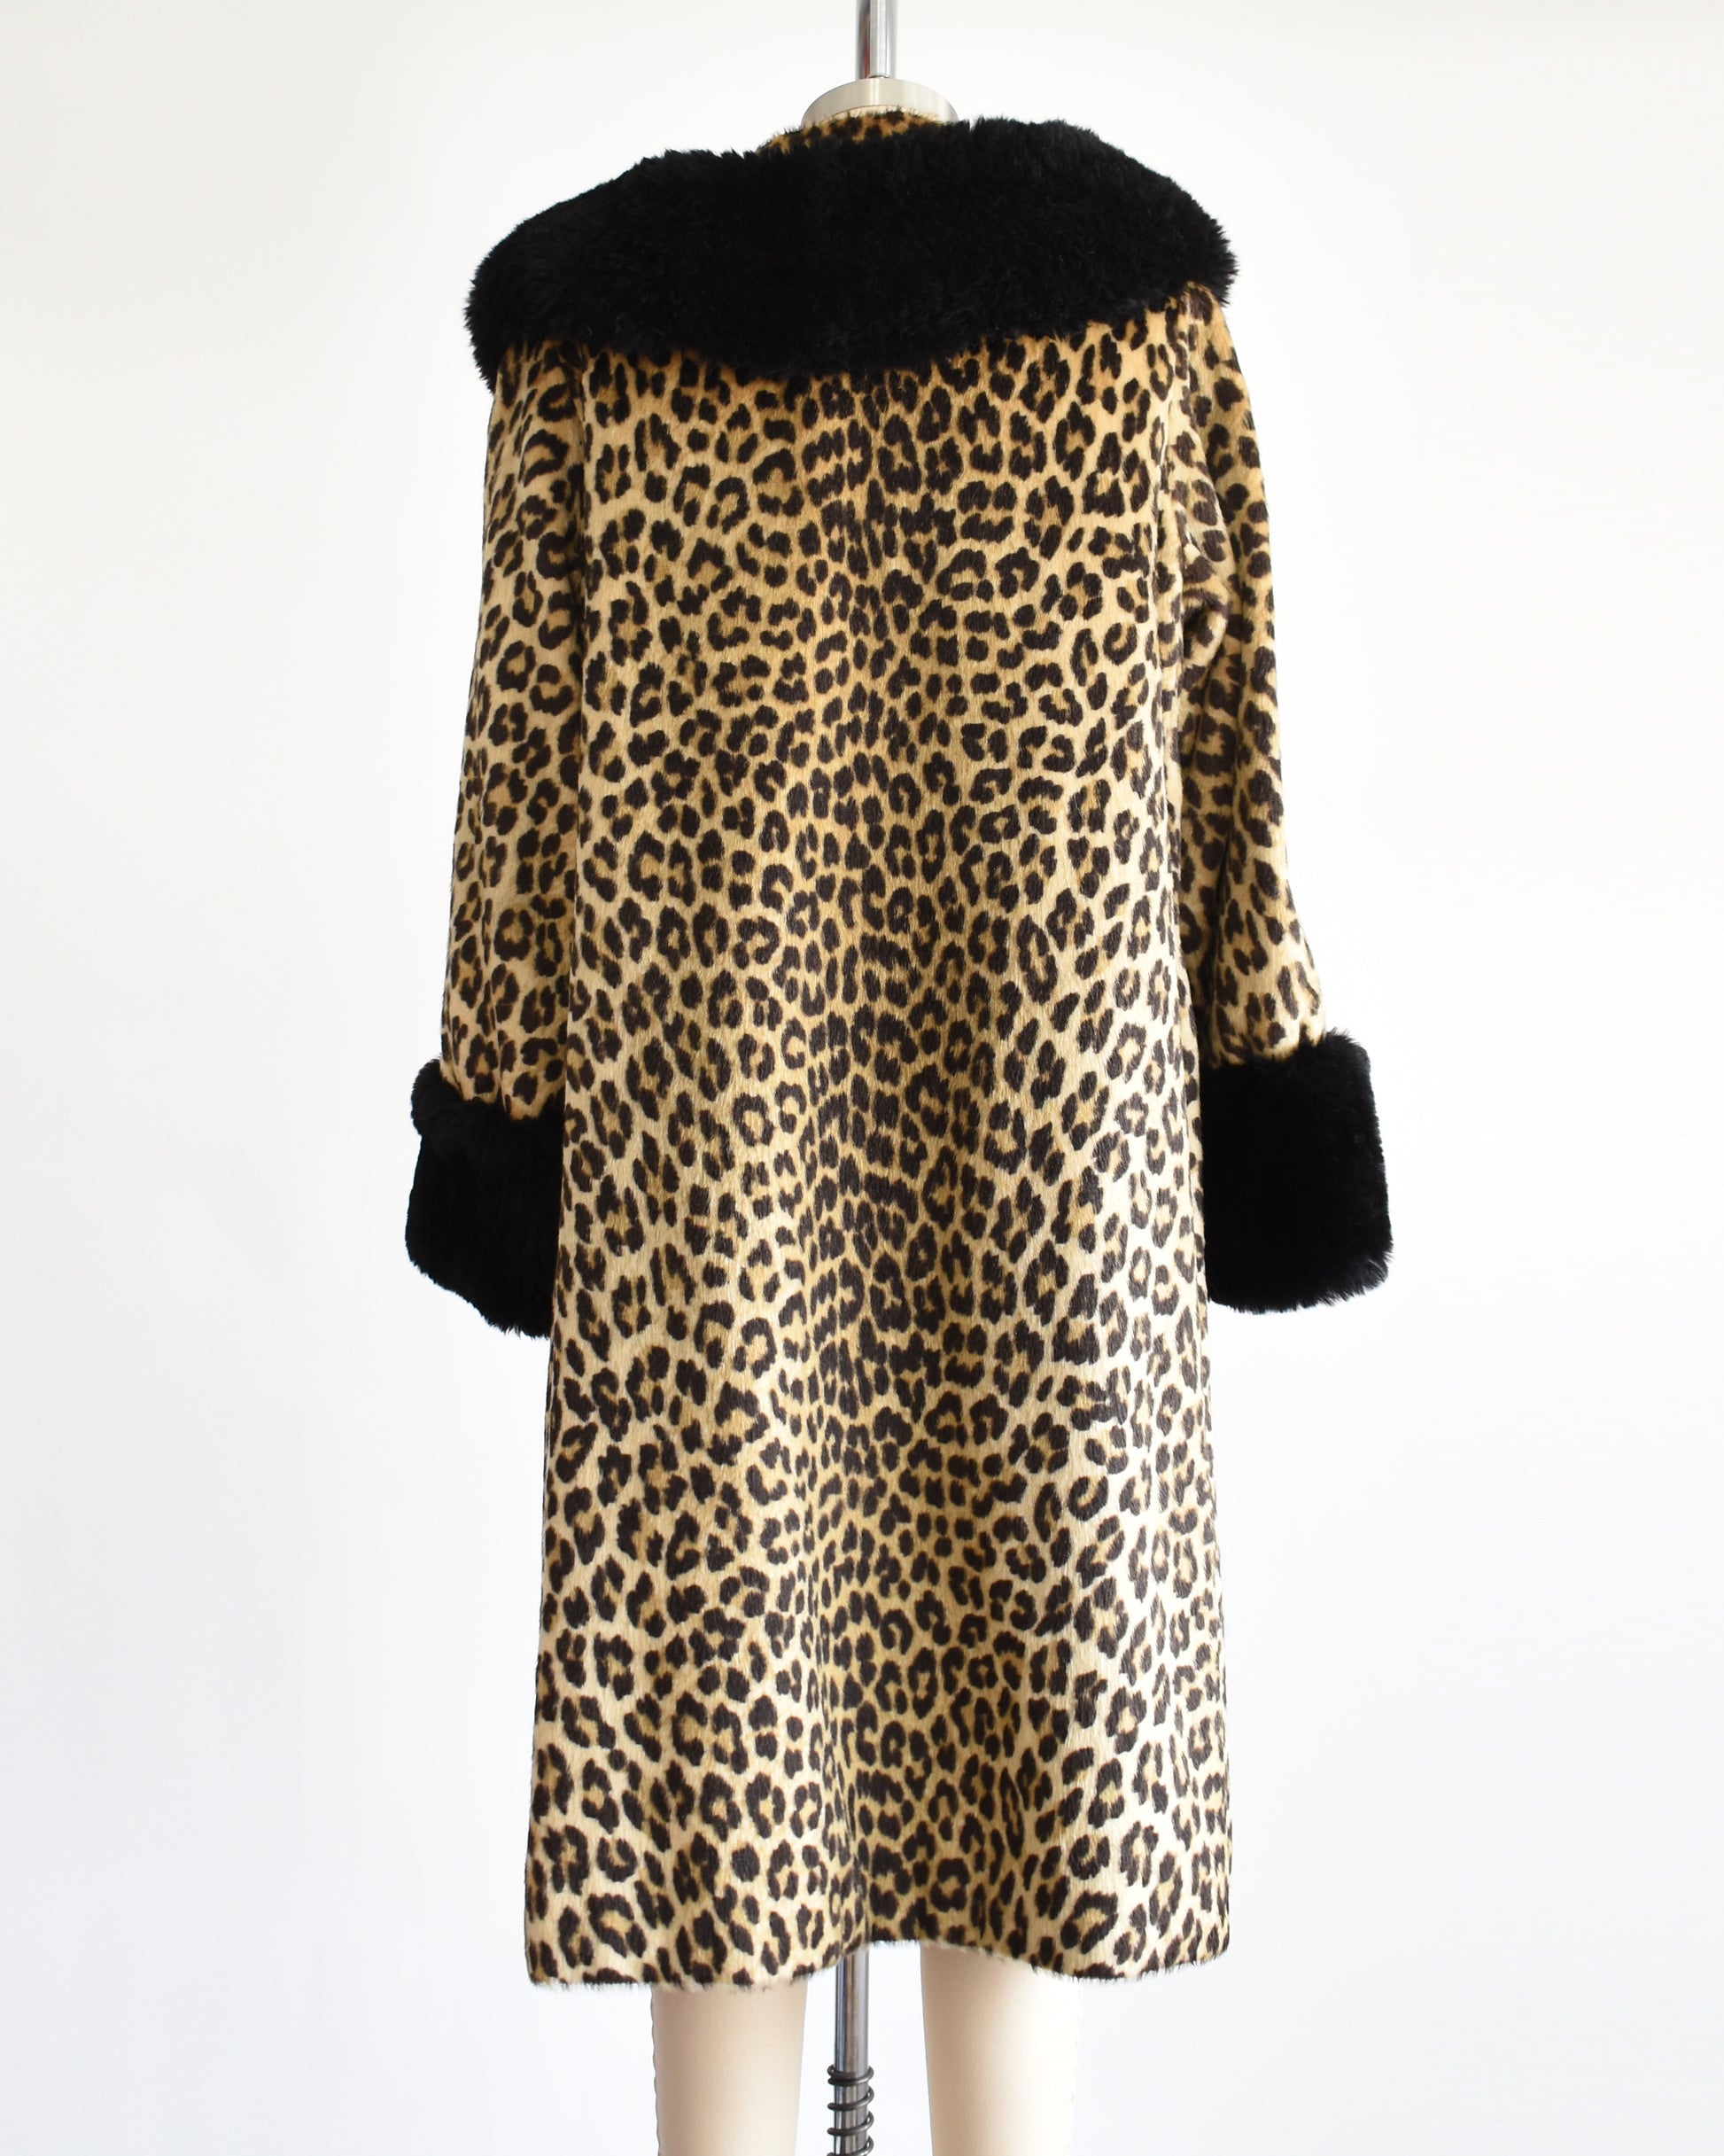 Back view of a vintage 1960s faux fur leopard print coat. Black plush trim along the collar and on the cuffs.